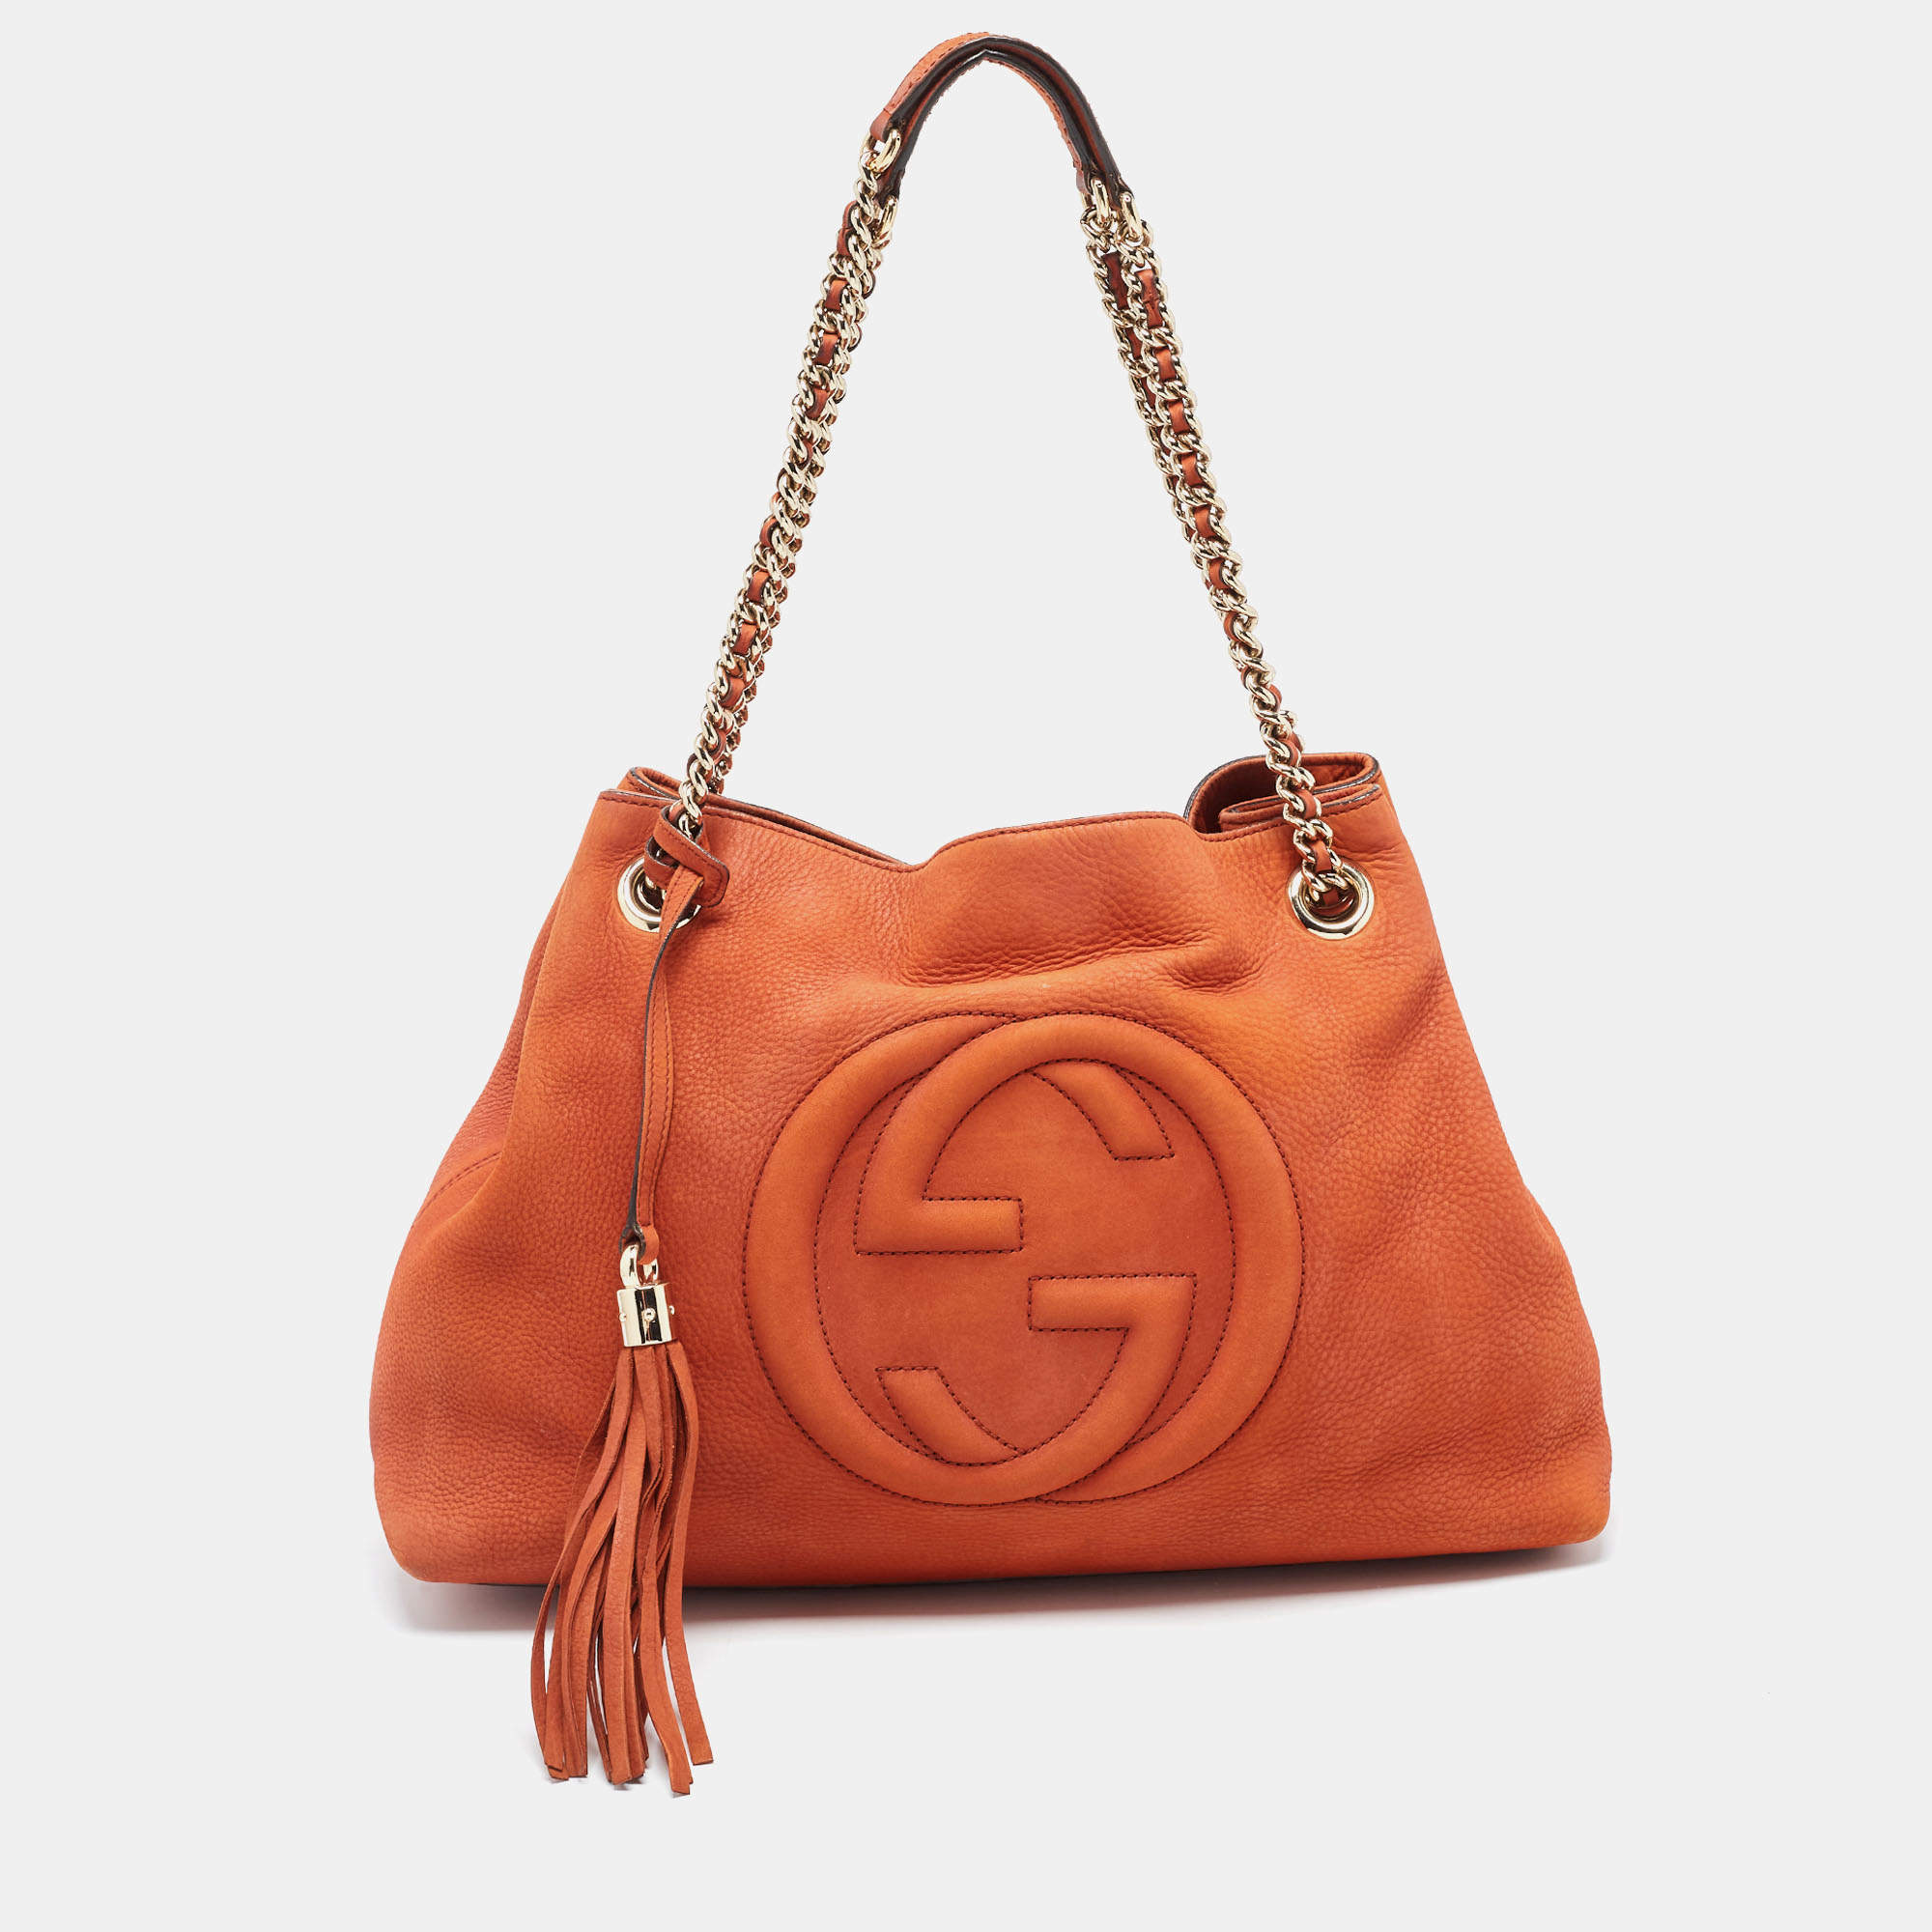 GUCCI Soho Red Gold Chain Shoulder Bag leather Tote Double G Gucci